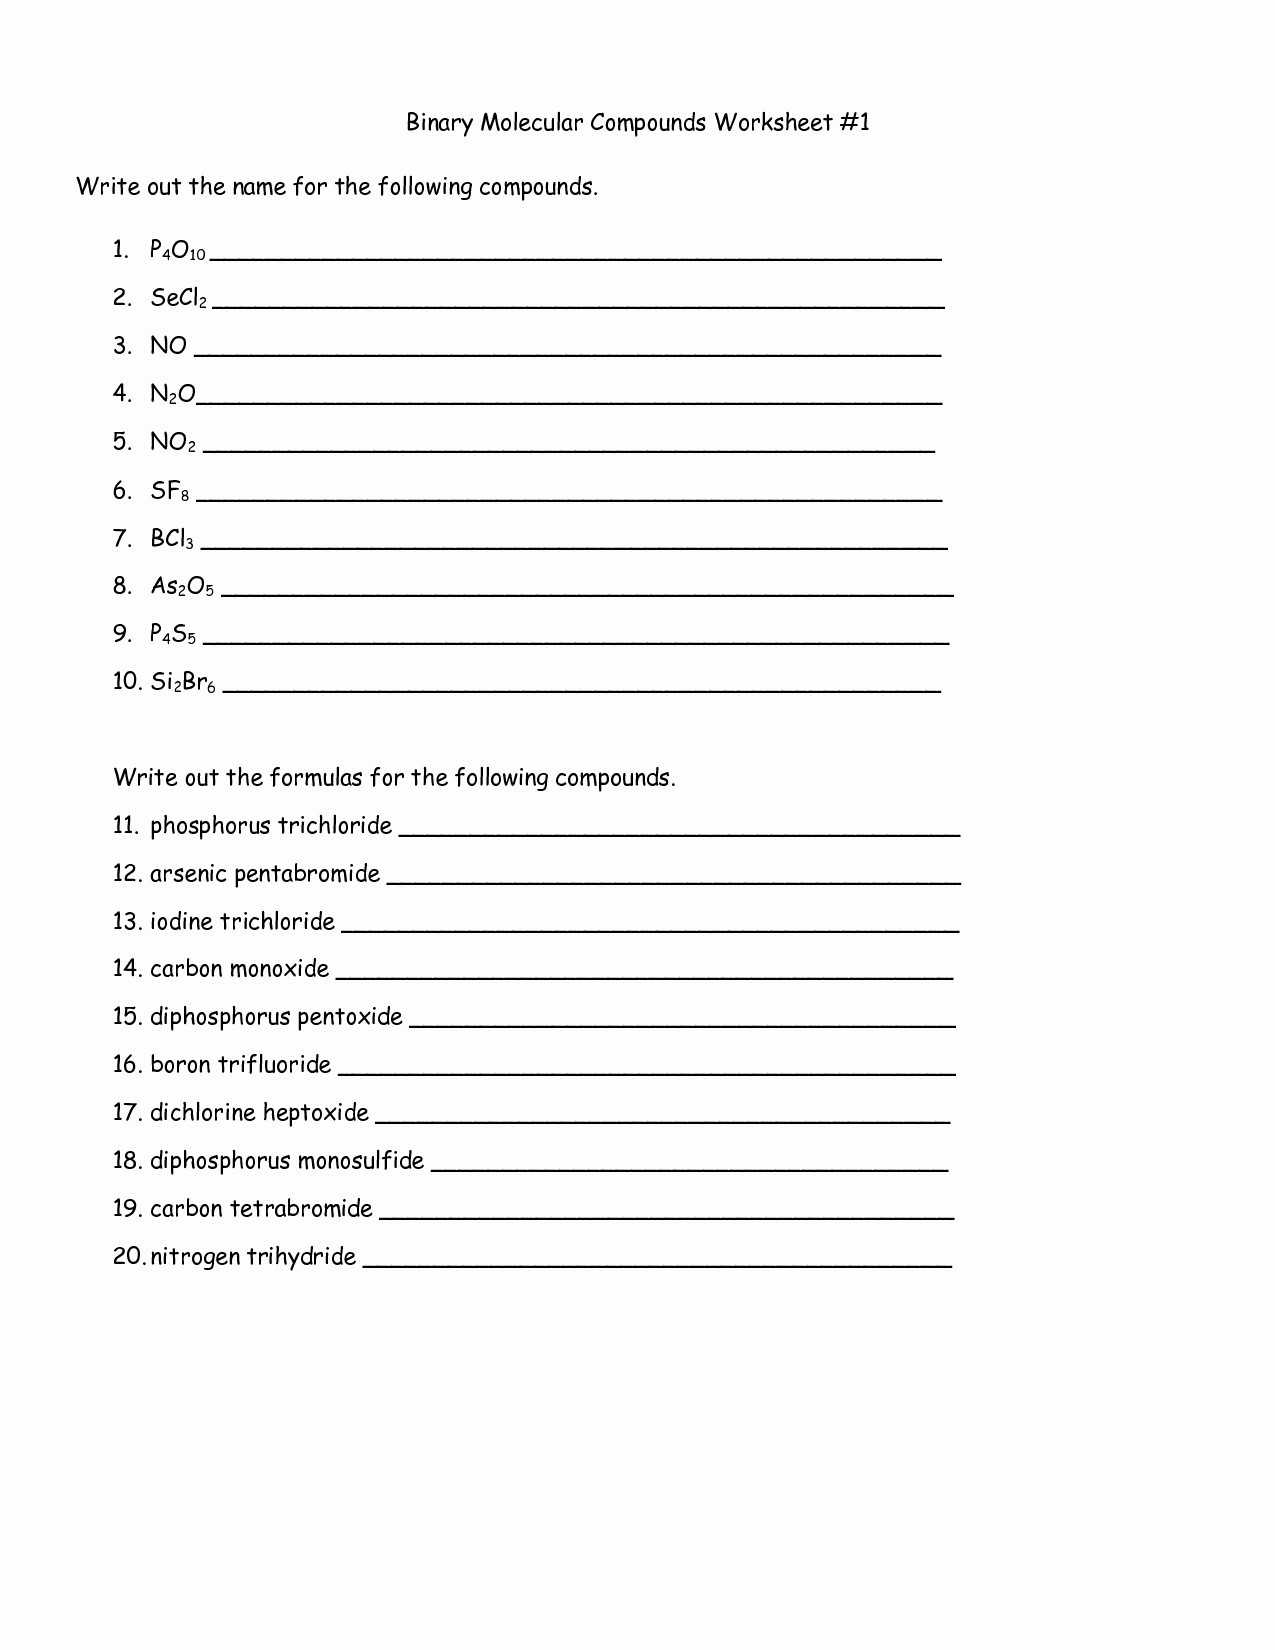 Ionic Compounds Worksheet Answers together with Writing Chemical formulas for Binary Ionic Pounds Worksheet